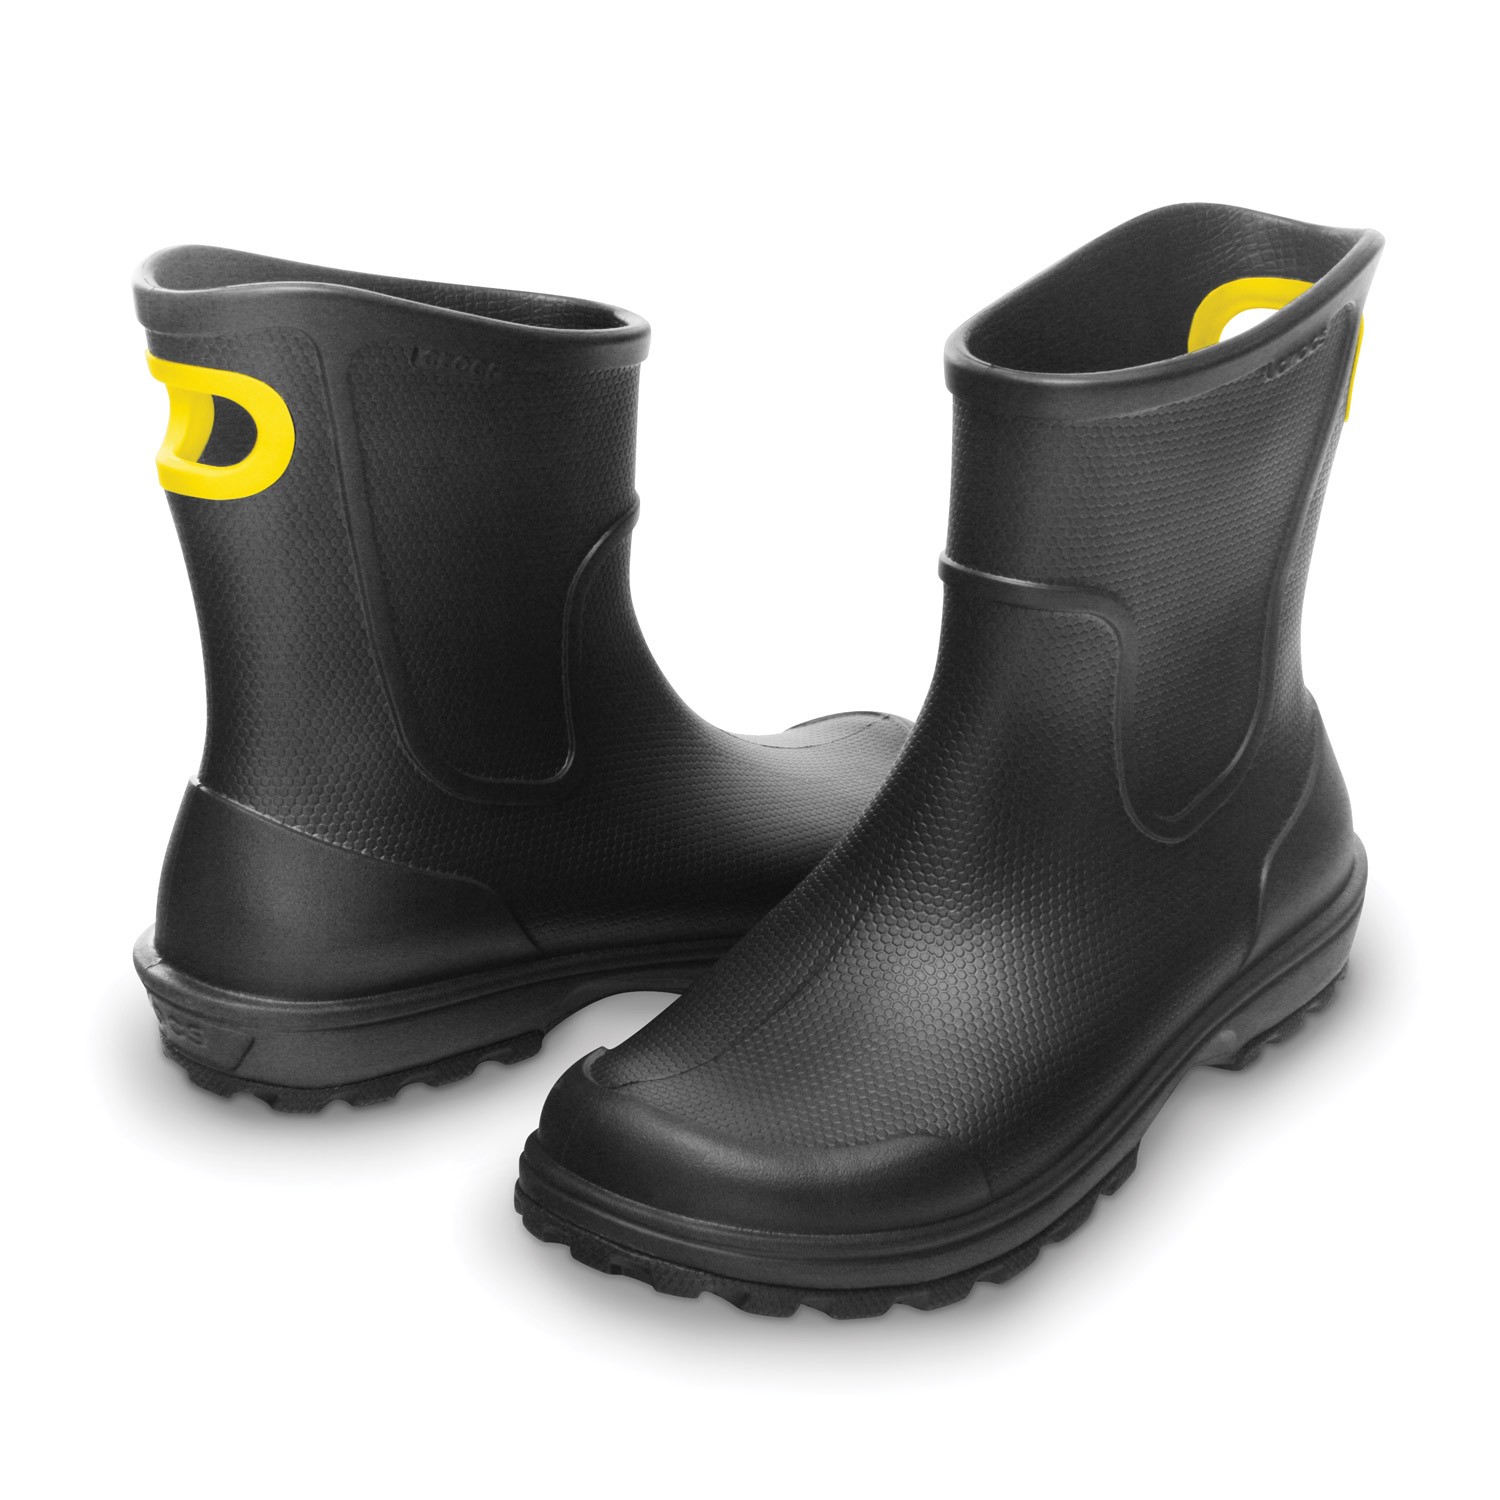 Crocs Womens Wellie Rain Boot - Rubber boots - Everyday shoes - Shoes ...